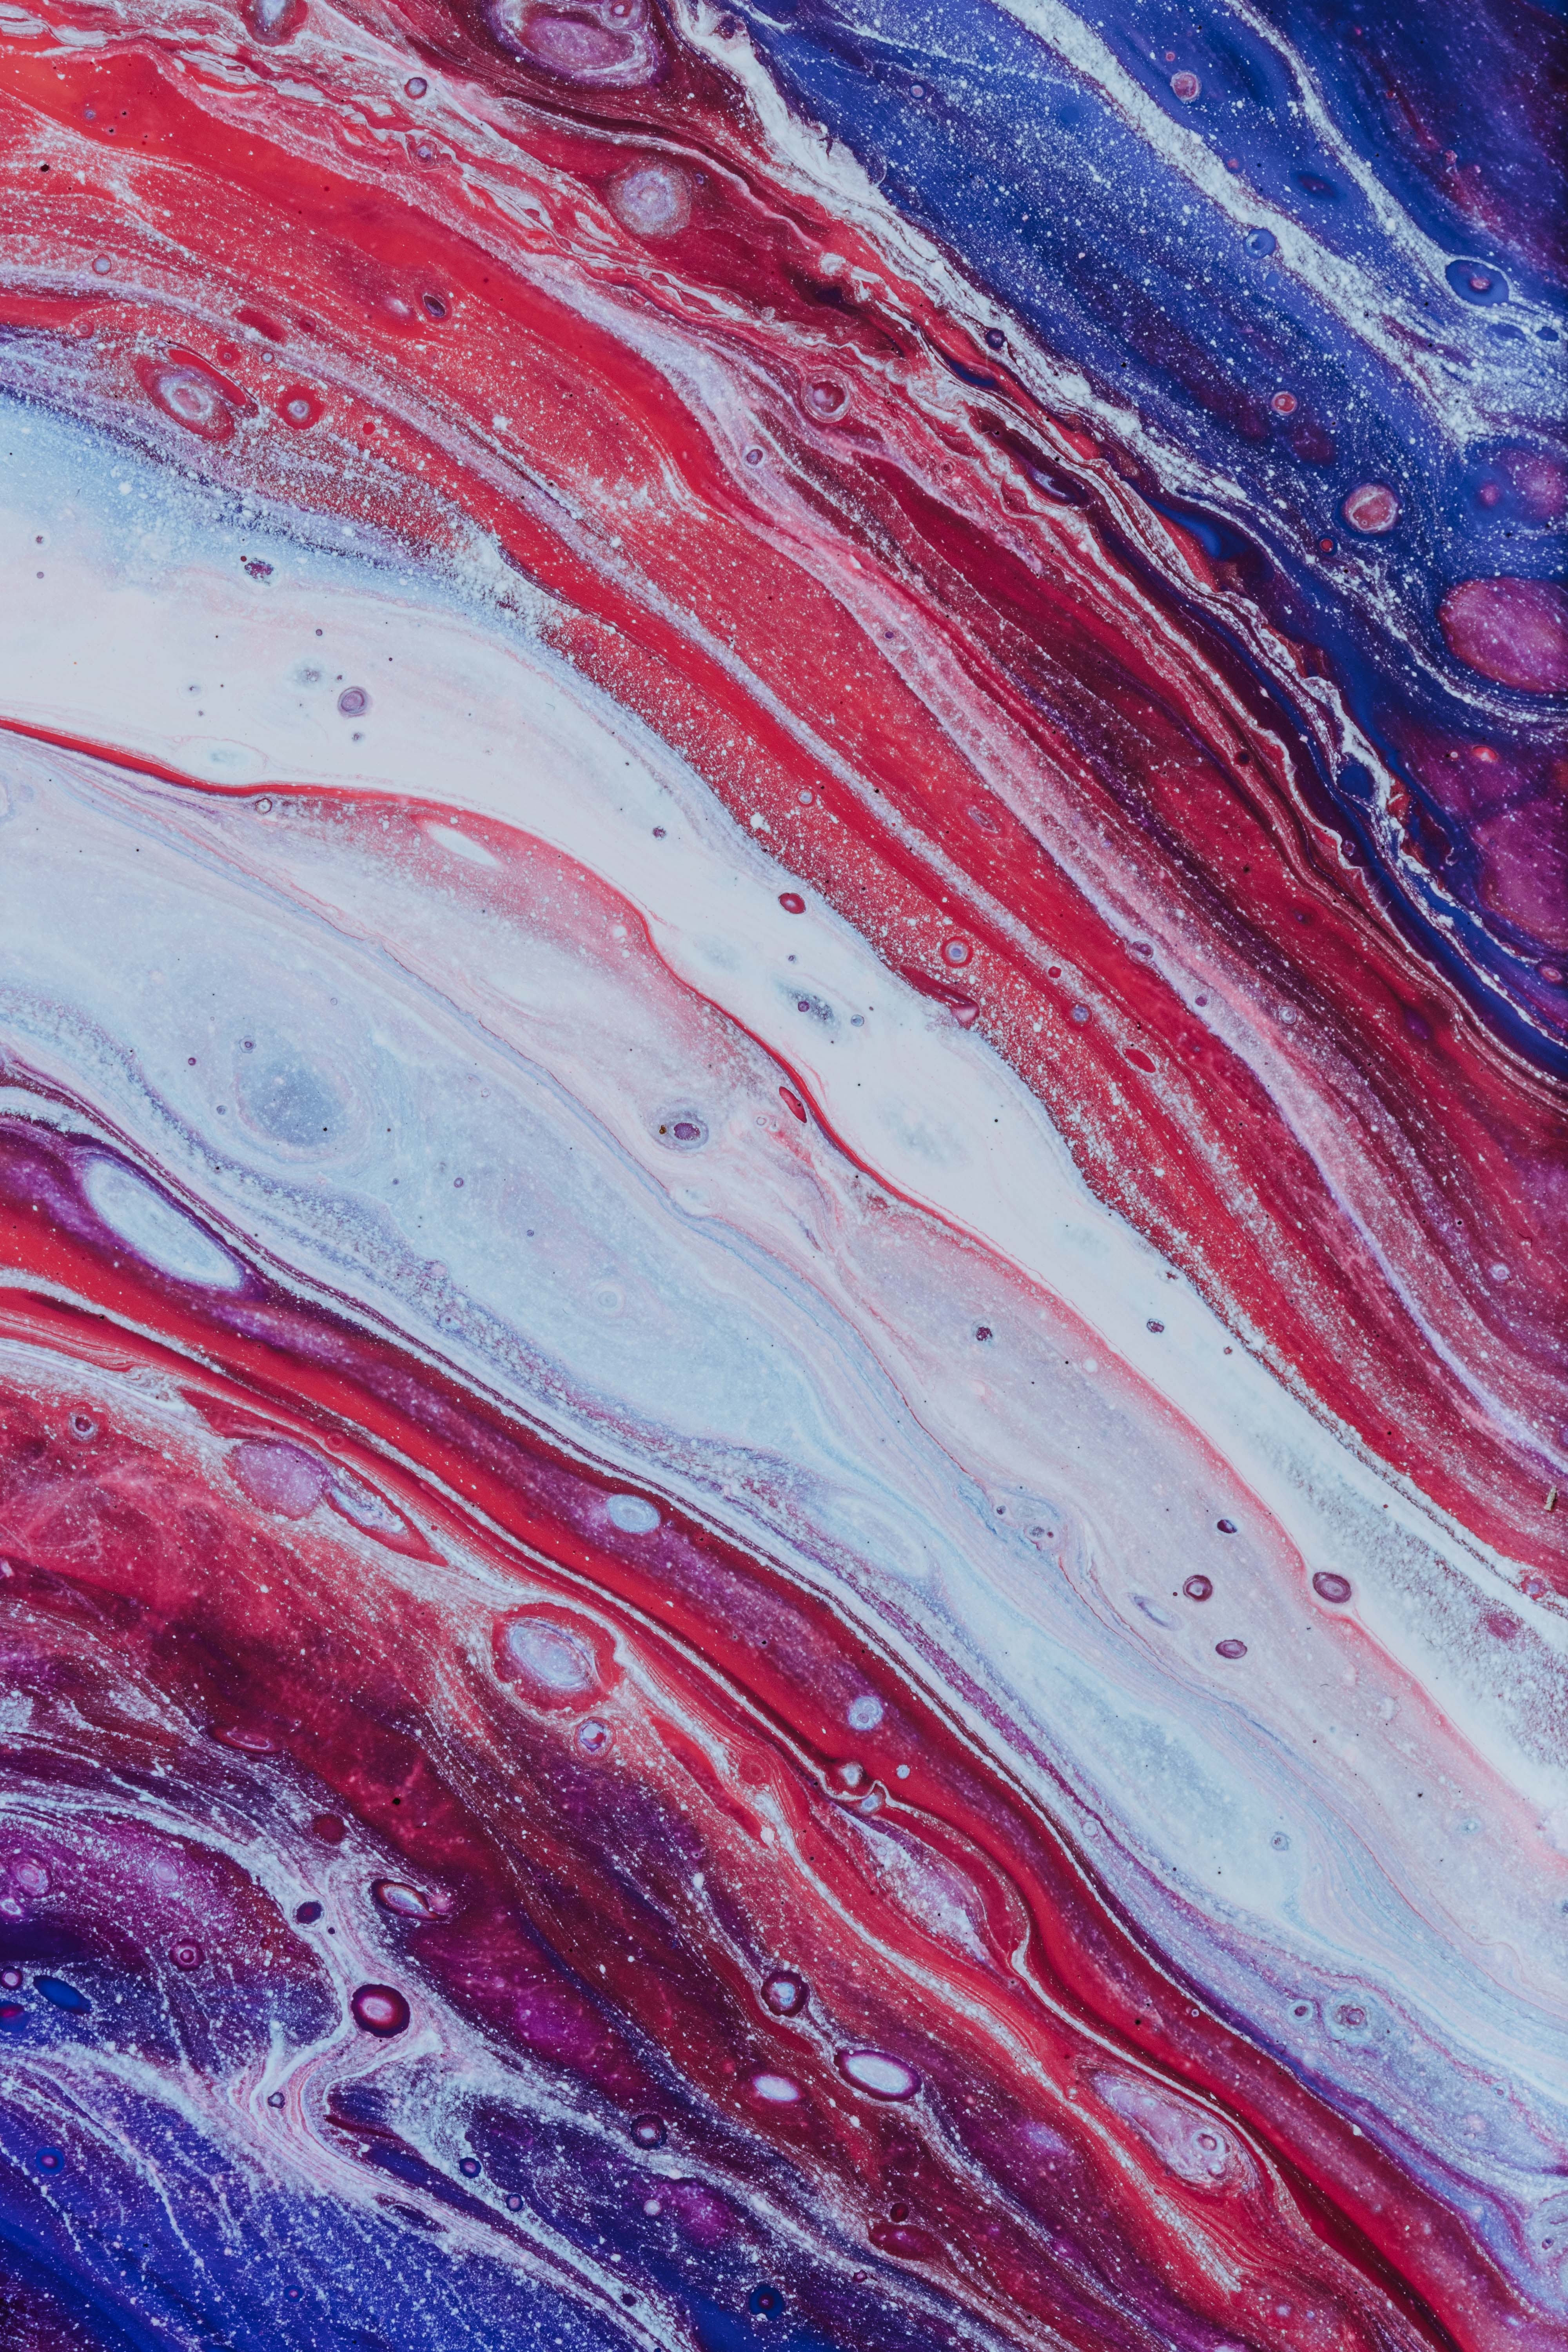 surface, abstract, divorces, multicolored, motley, paint, liquid, mixing wallpapers for tablet